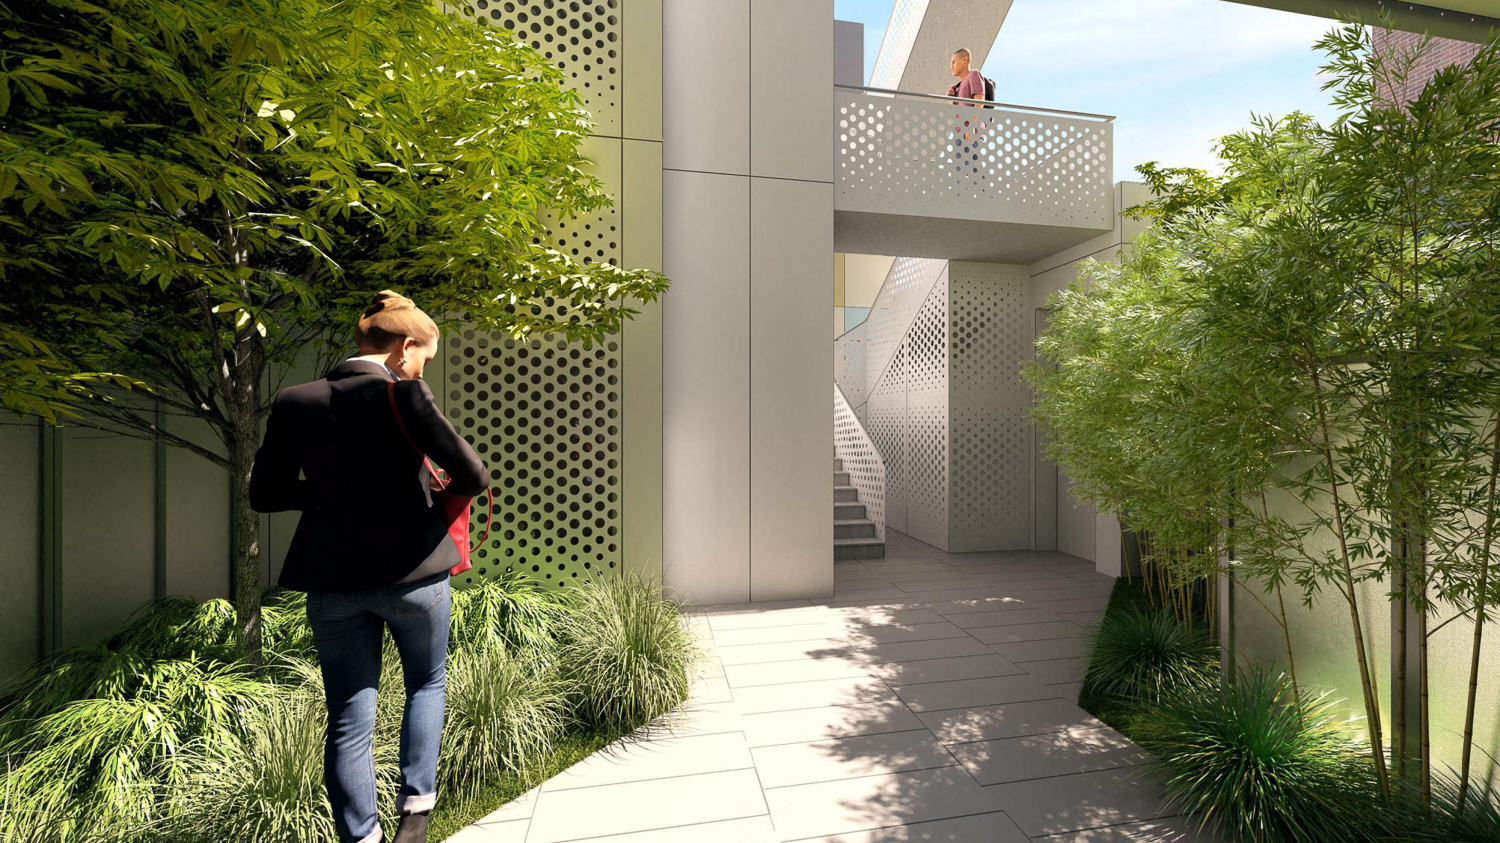 1721 15th Street courtyard, rendering by Lowney Architecture